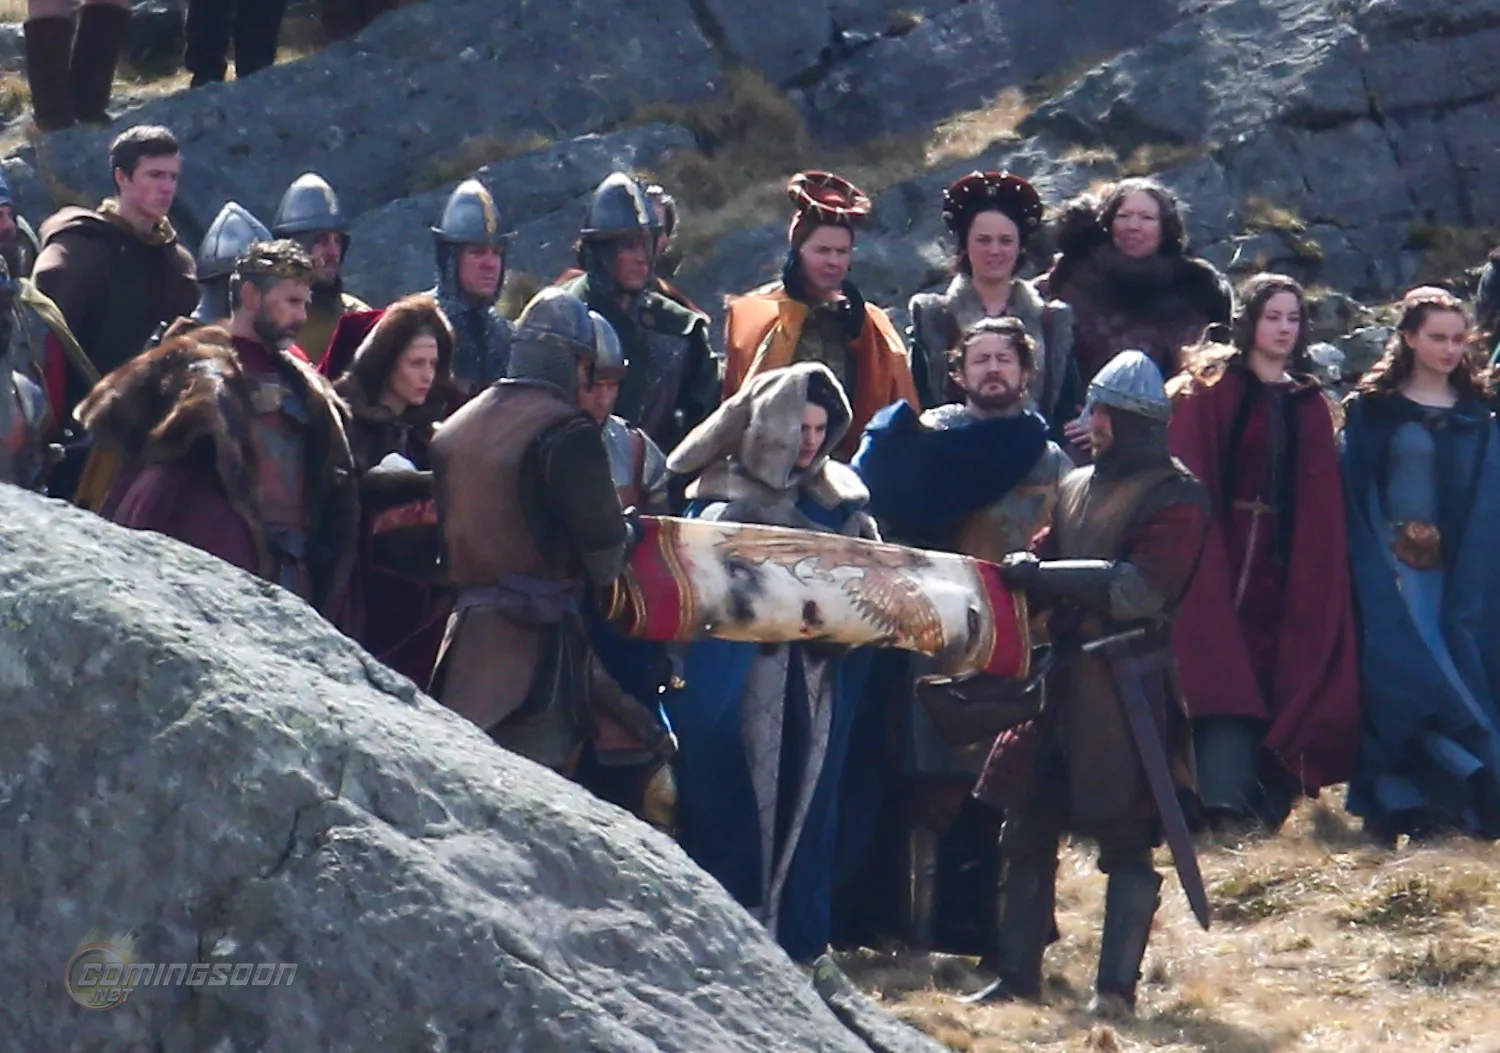 'Knights of the Roundtable: King Arthur' filming in Wales

Featuring: Jude Law, Eric Bana, Poppy Delavingne
Where: Conwy, United Kingdom
When: 14 Apr 2015
Credit: WENN.com